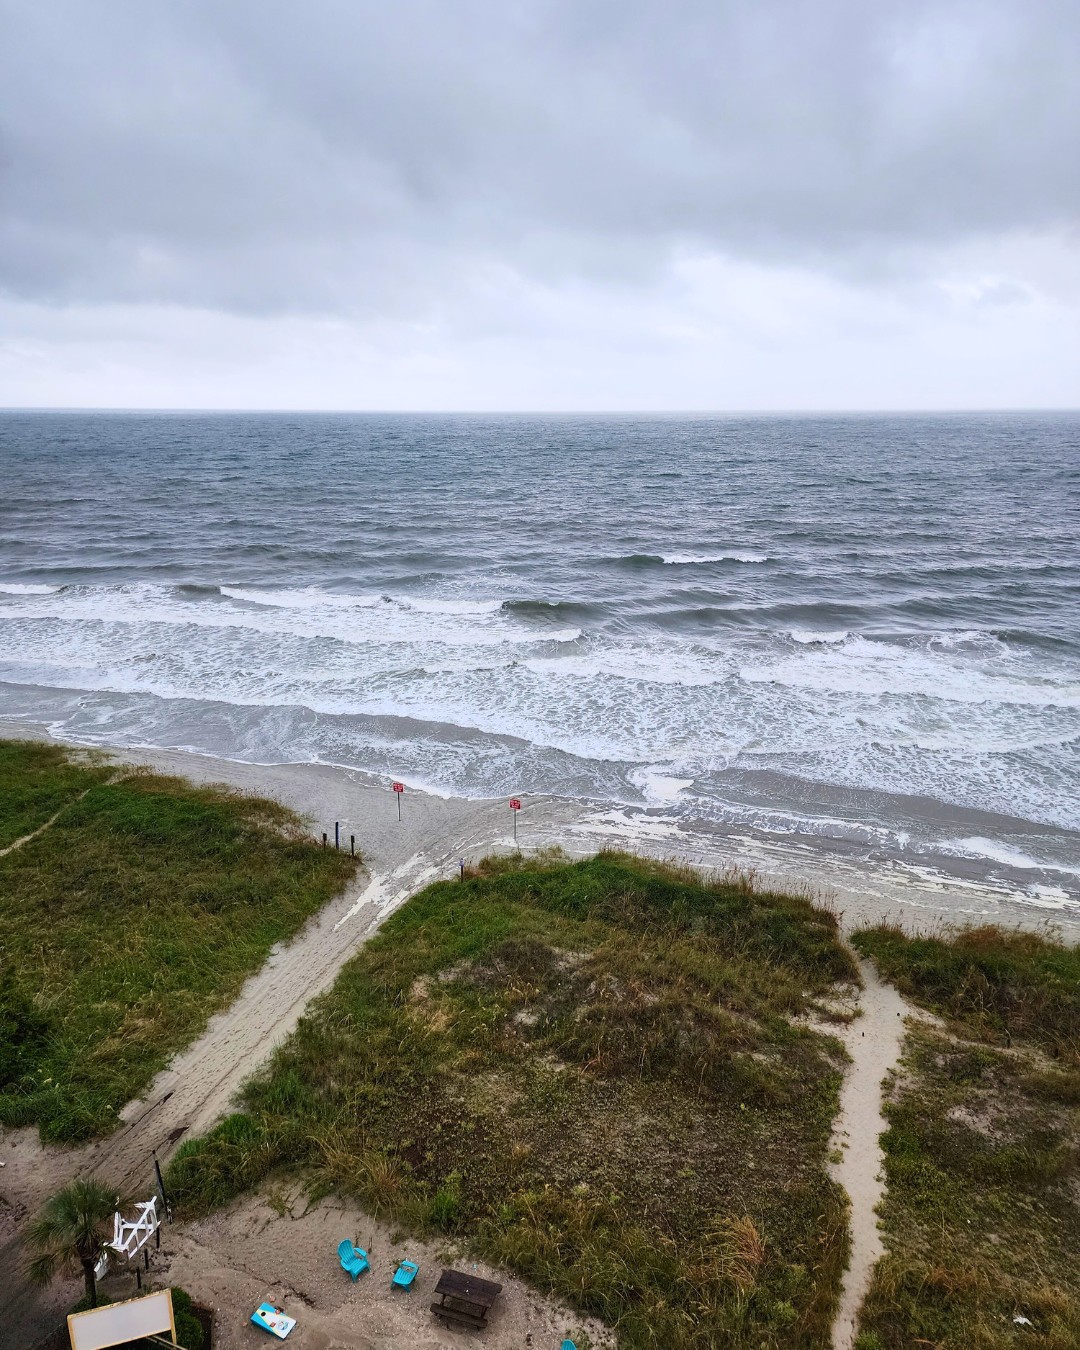 Is a hurricane on Myrtle Beach, SC ruining your vacation plans? Be sure to plan for a safe visit with these tips. Learn about evacuation plans, alerts, and tourist advice for a memorable trip.